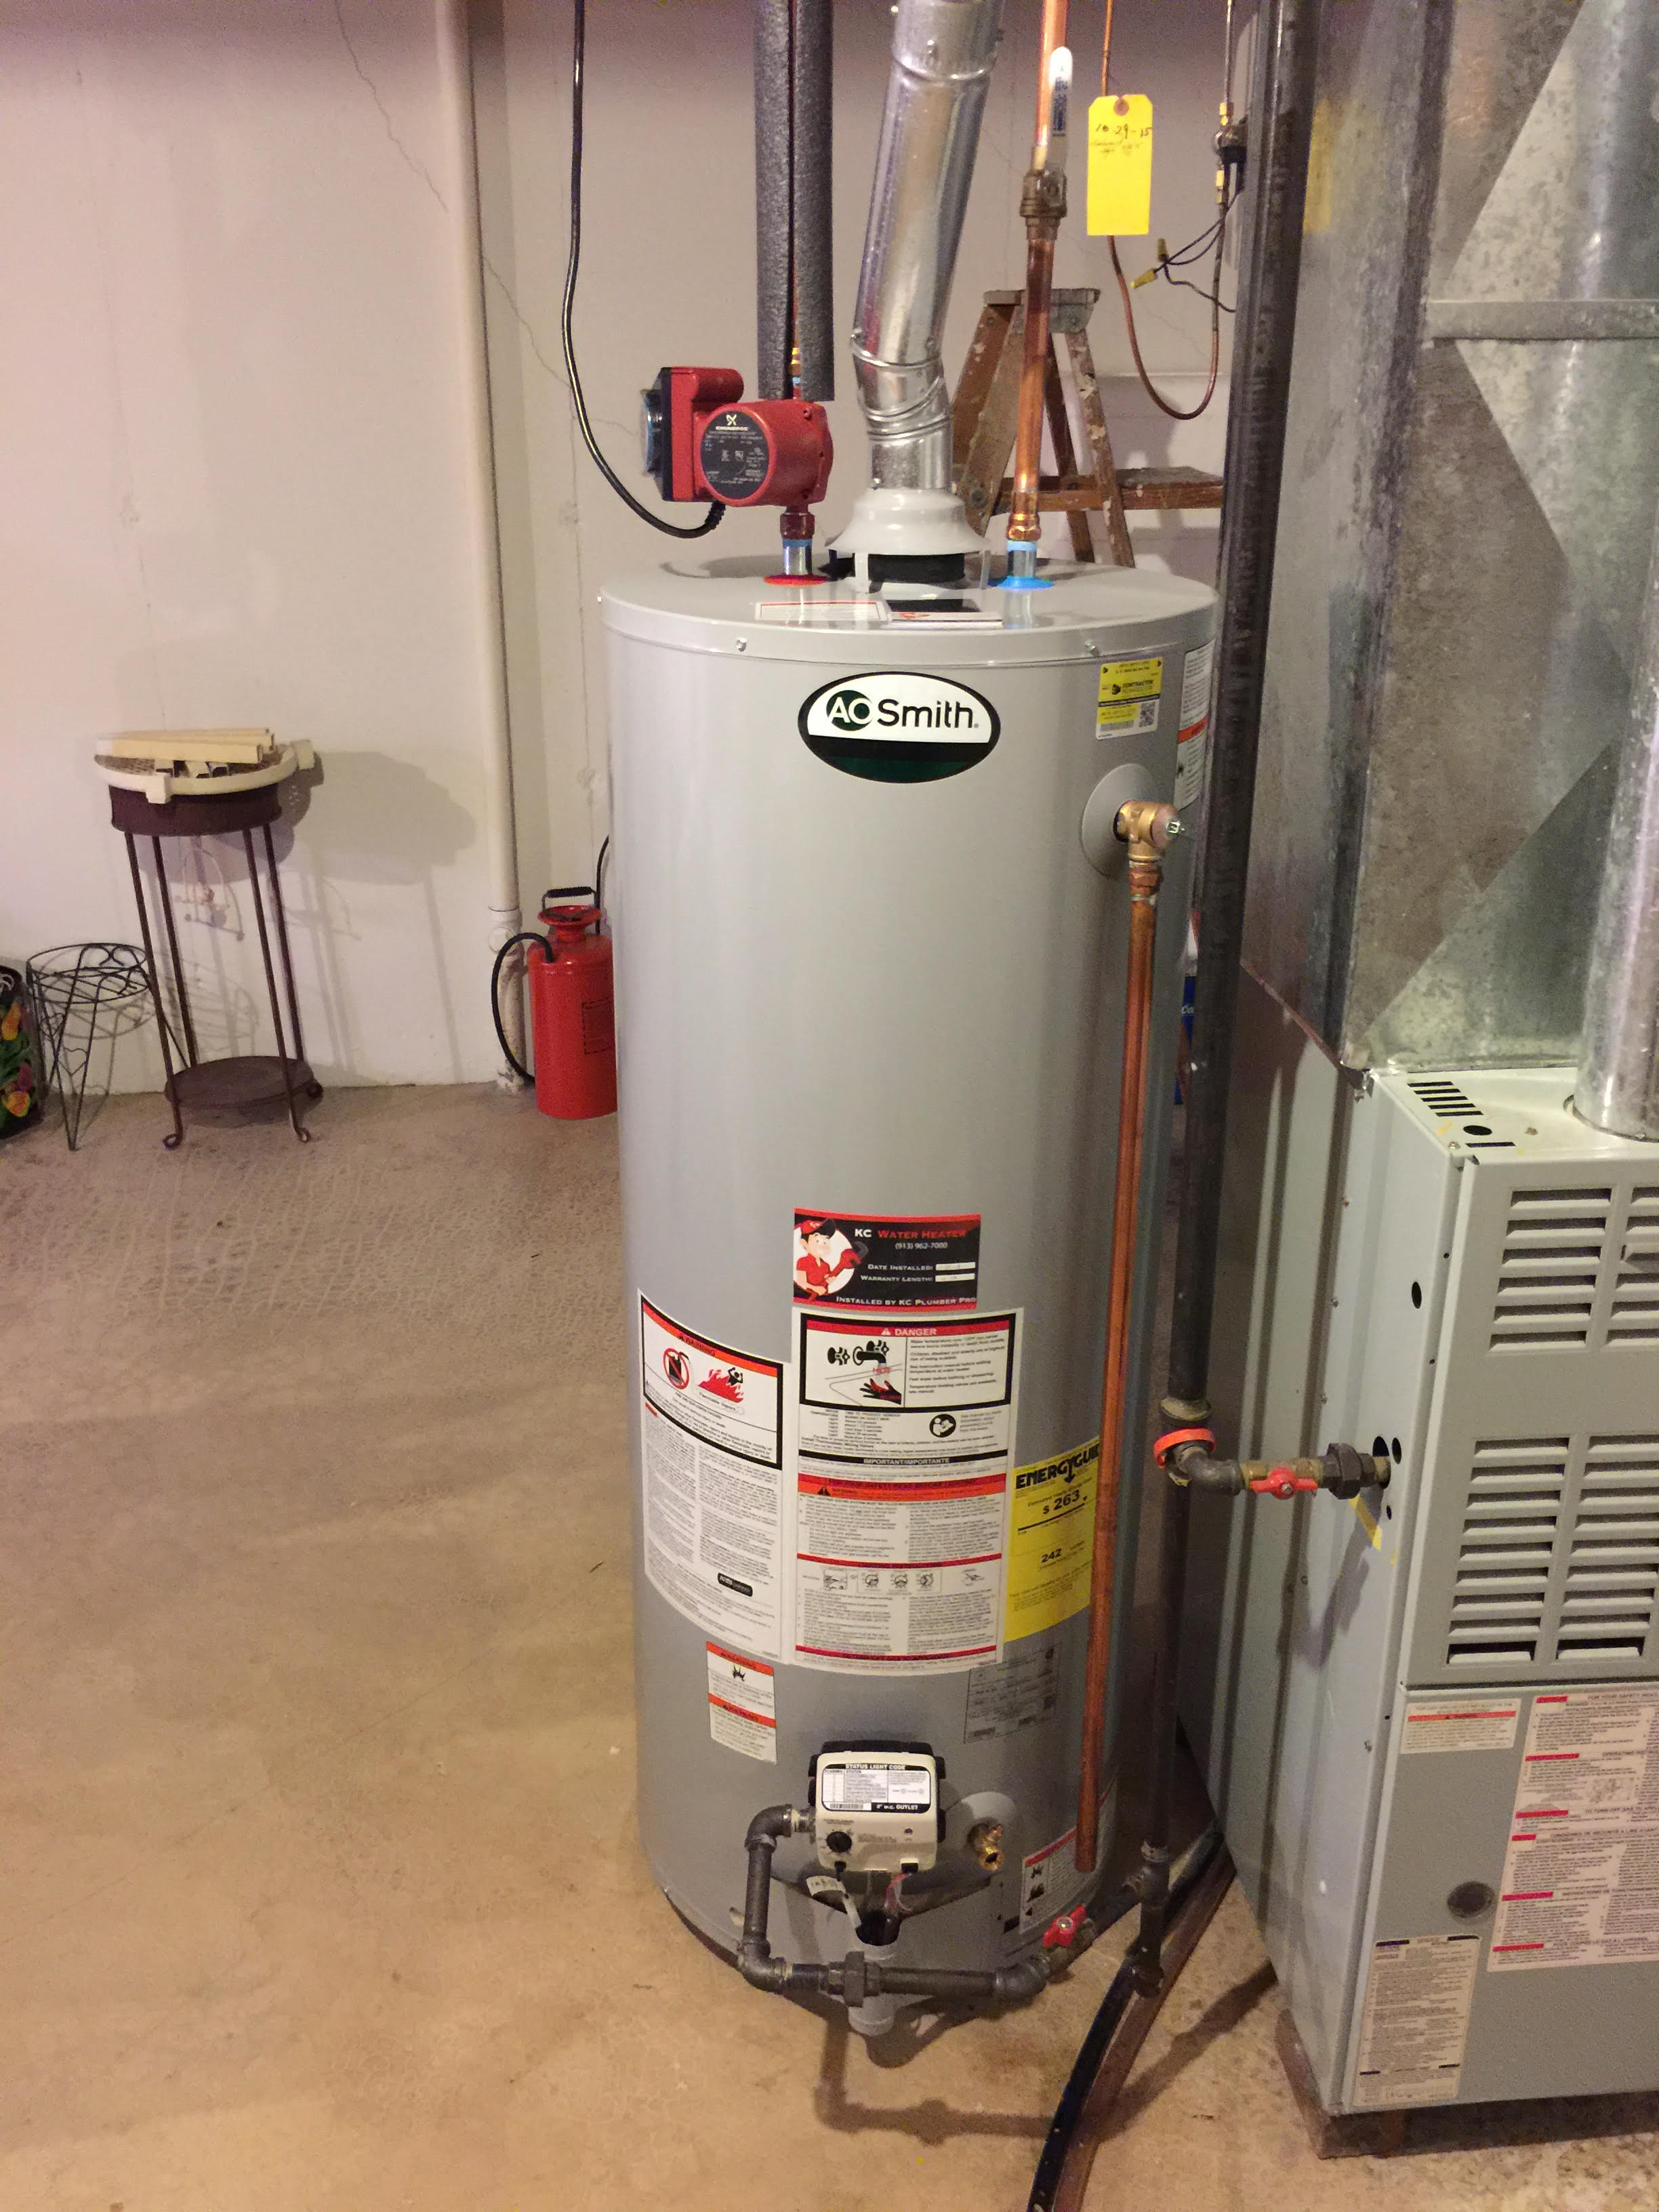 How do you find a service provider who sells A.O. Smith water heaters?